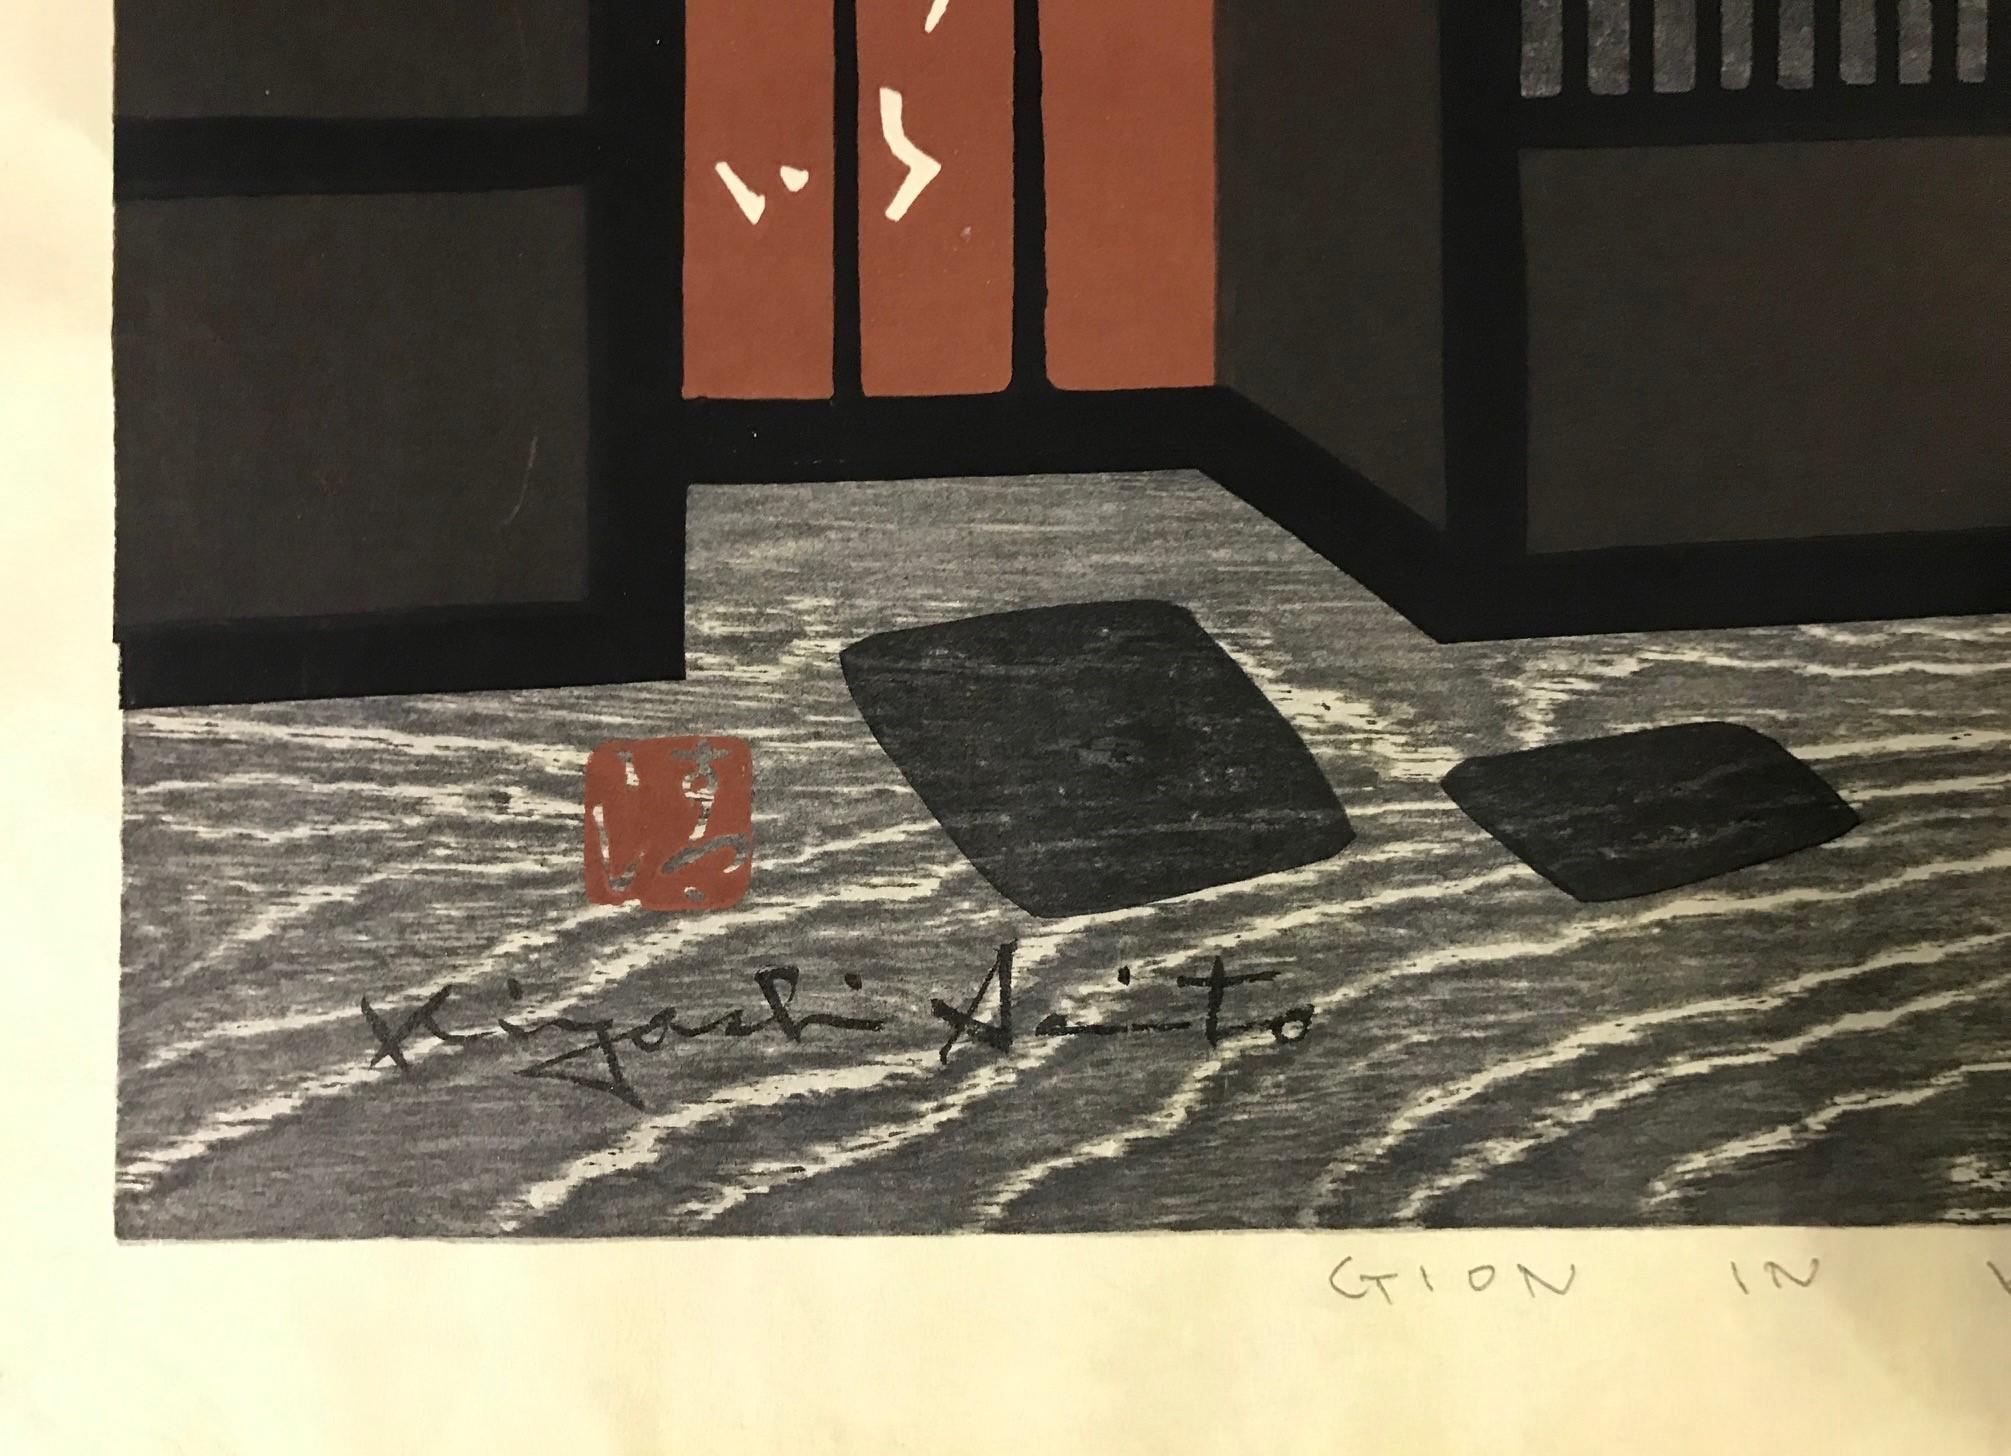 A beautifully composed, rare woodblock print by famed Japanese printmaker Kiyoshi Saito. Many consider Saito to be one of the most important, if not the most important, contemporary Japanese printmakers of the 20th century. This print of a walkway